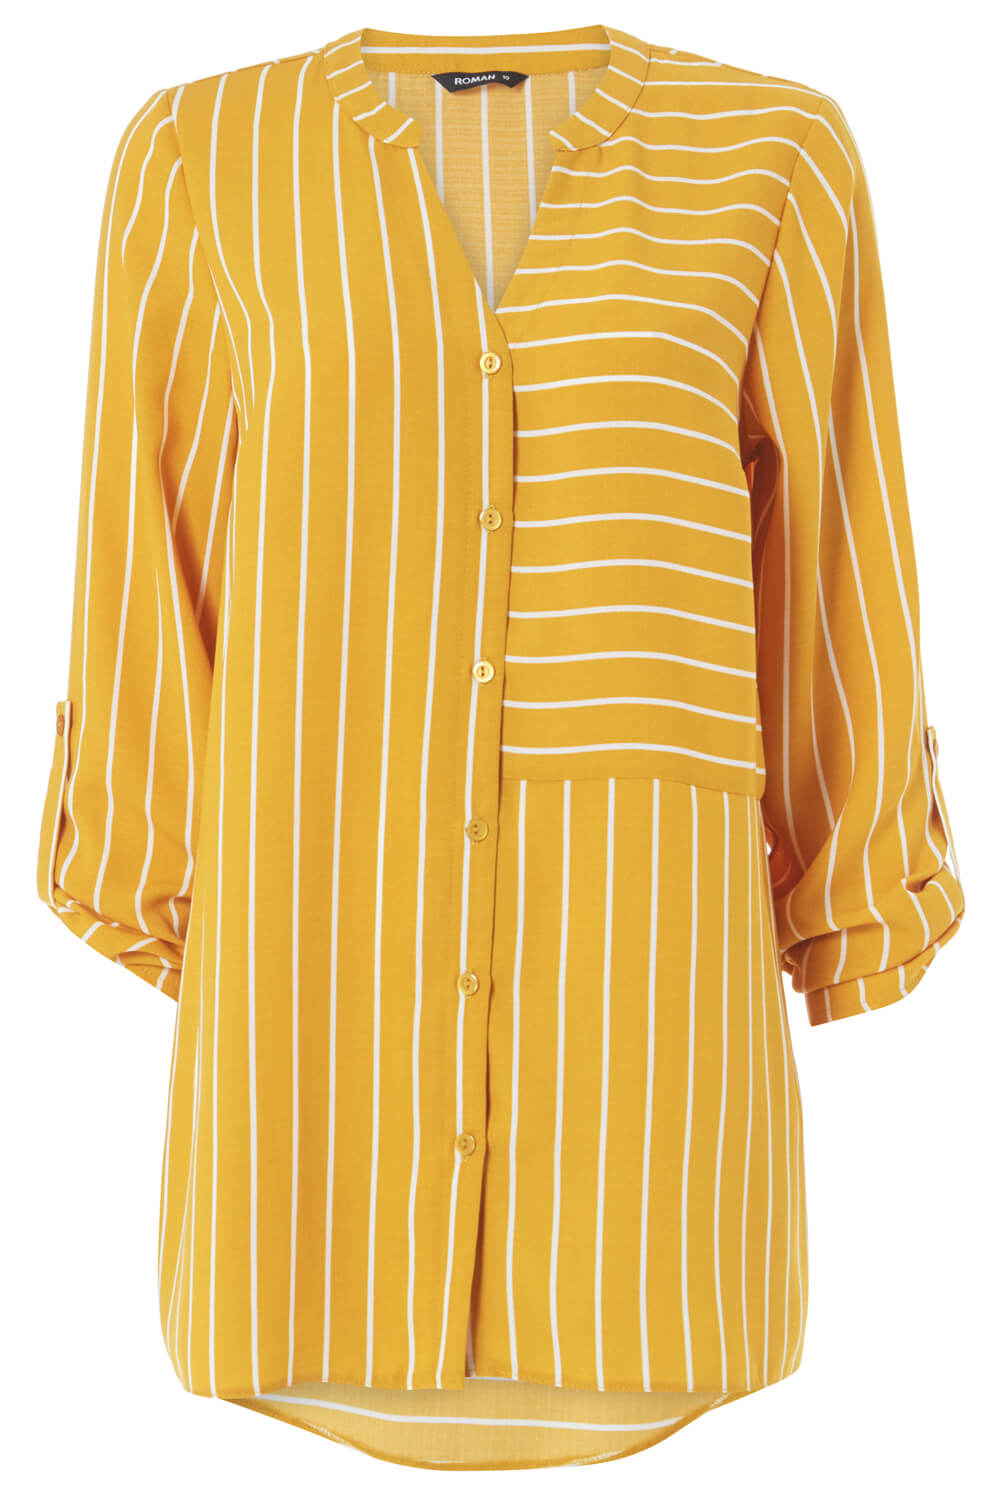 Amber Contrast Stripe Button Through Shirt, Image 5 of 5